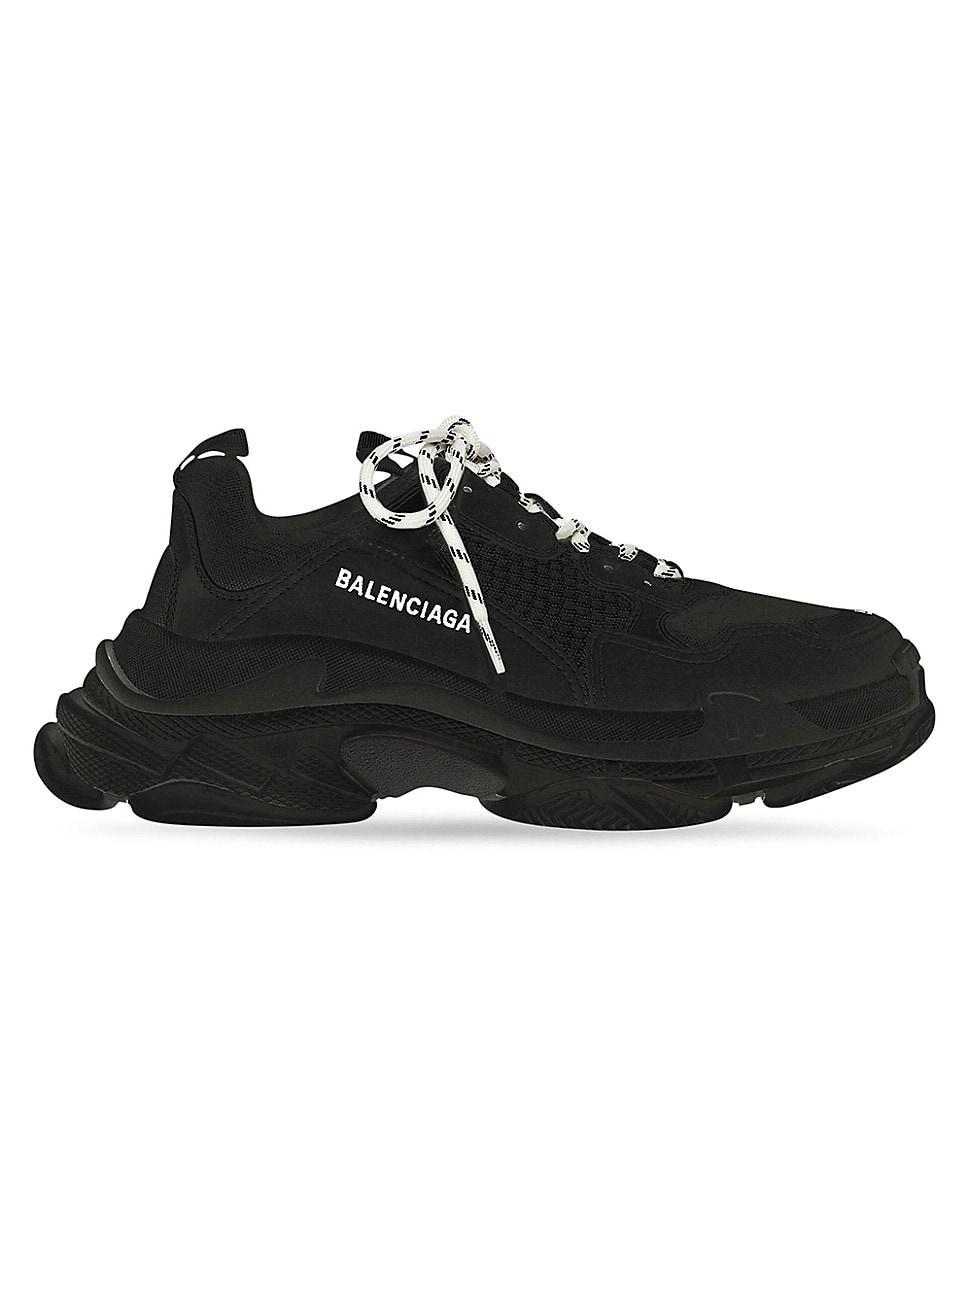 Womens Triple S Sneakers Product Image